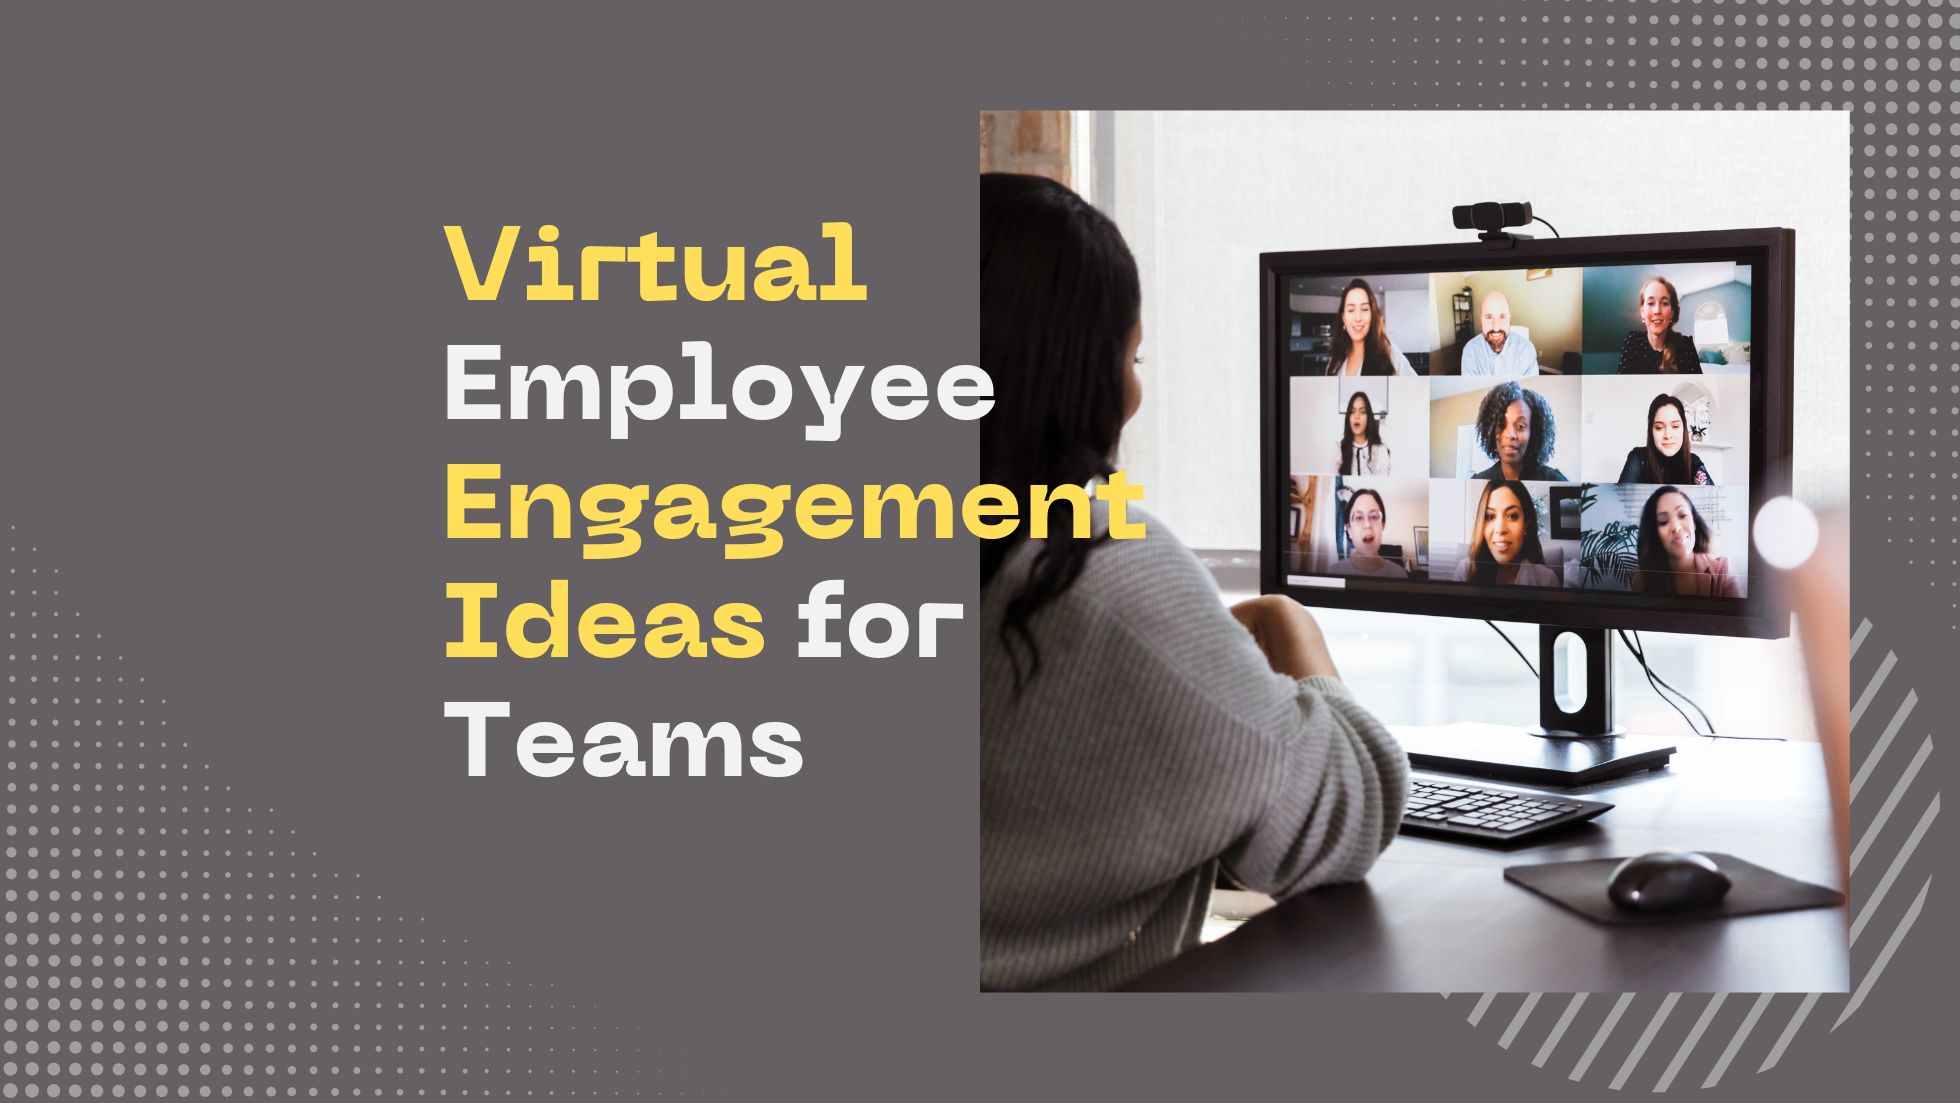 Virtual Employee Engagement Ideas for Teams